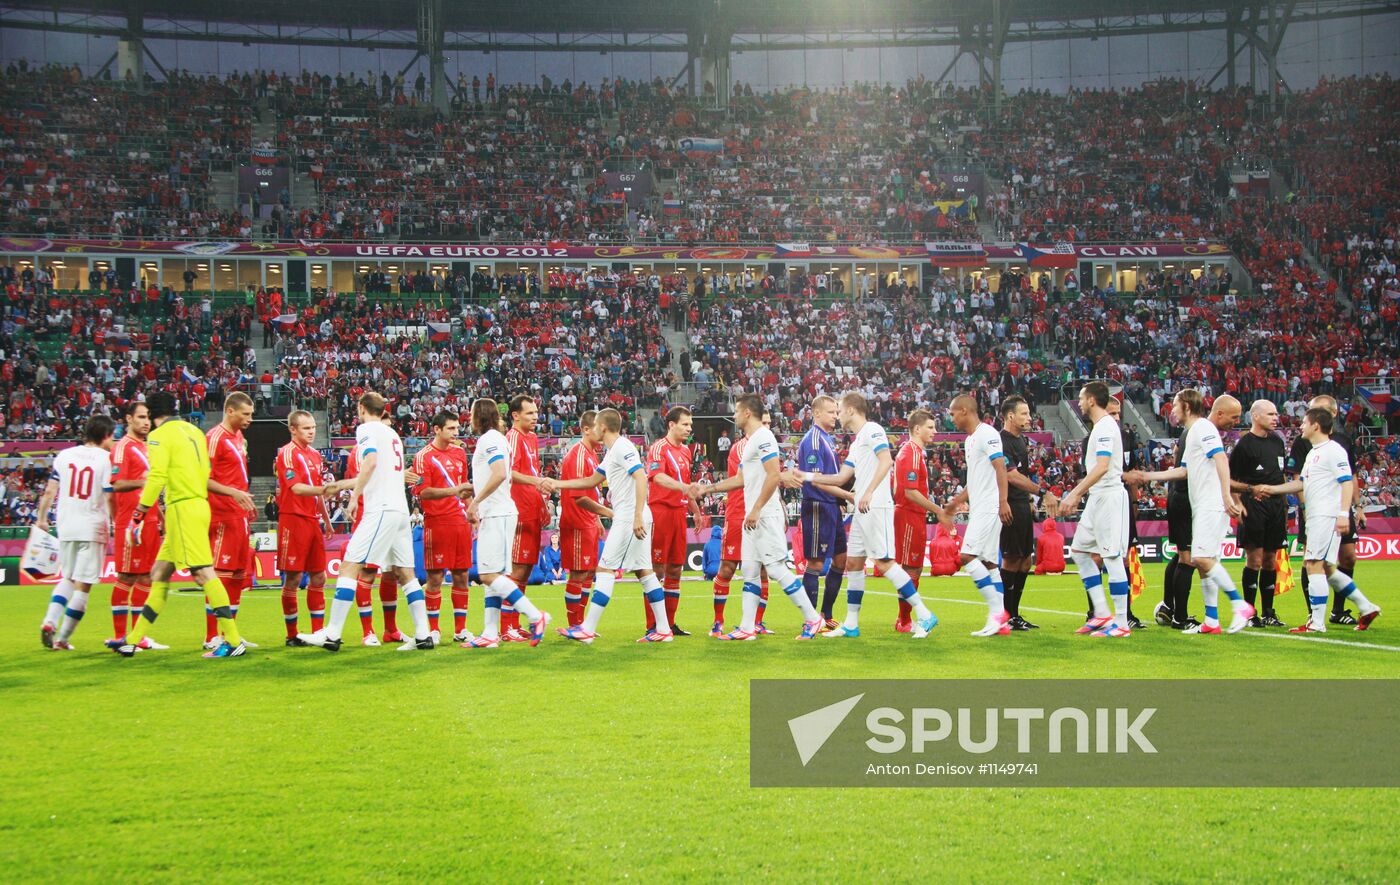 Broadcast of EURO 2012 match between Russia and Czech Republic